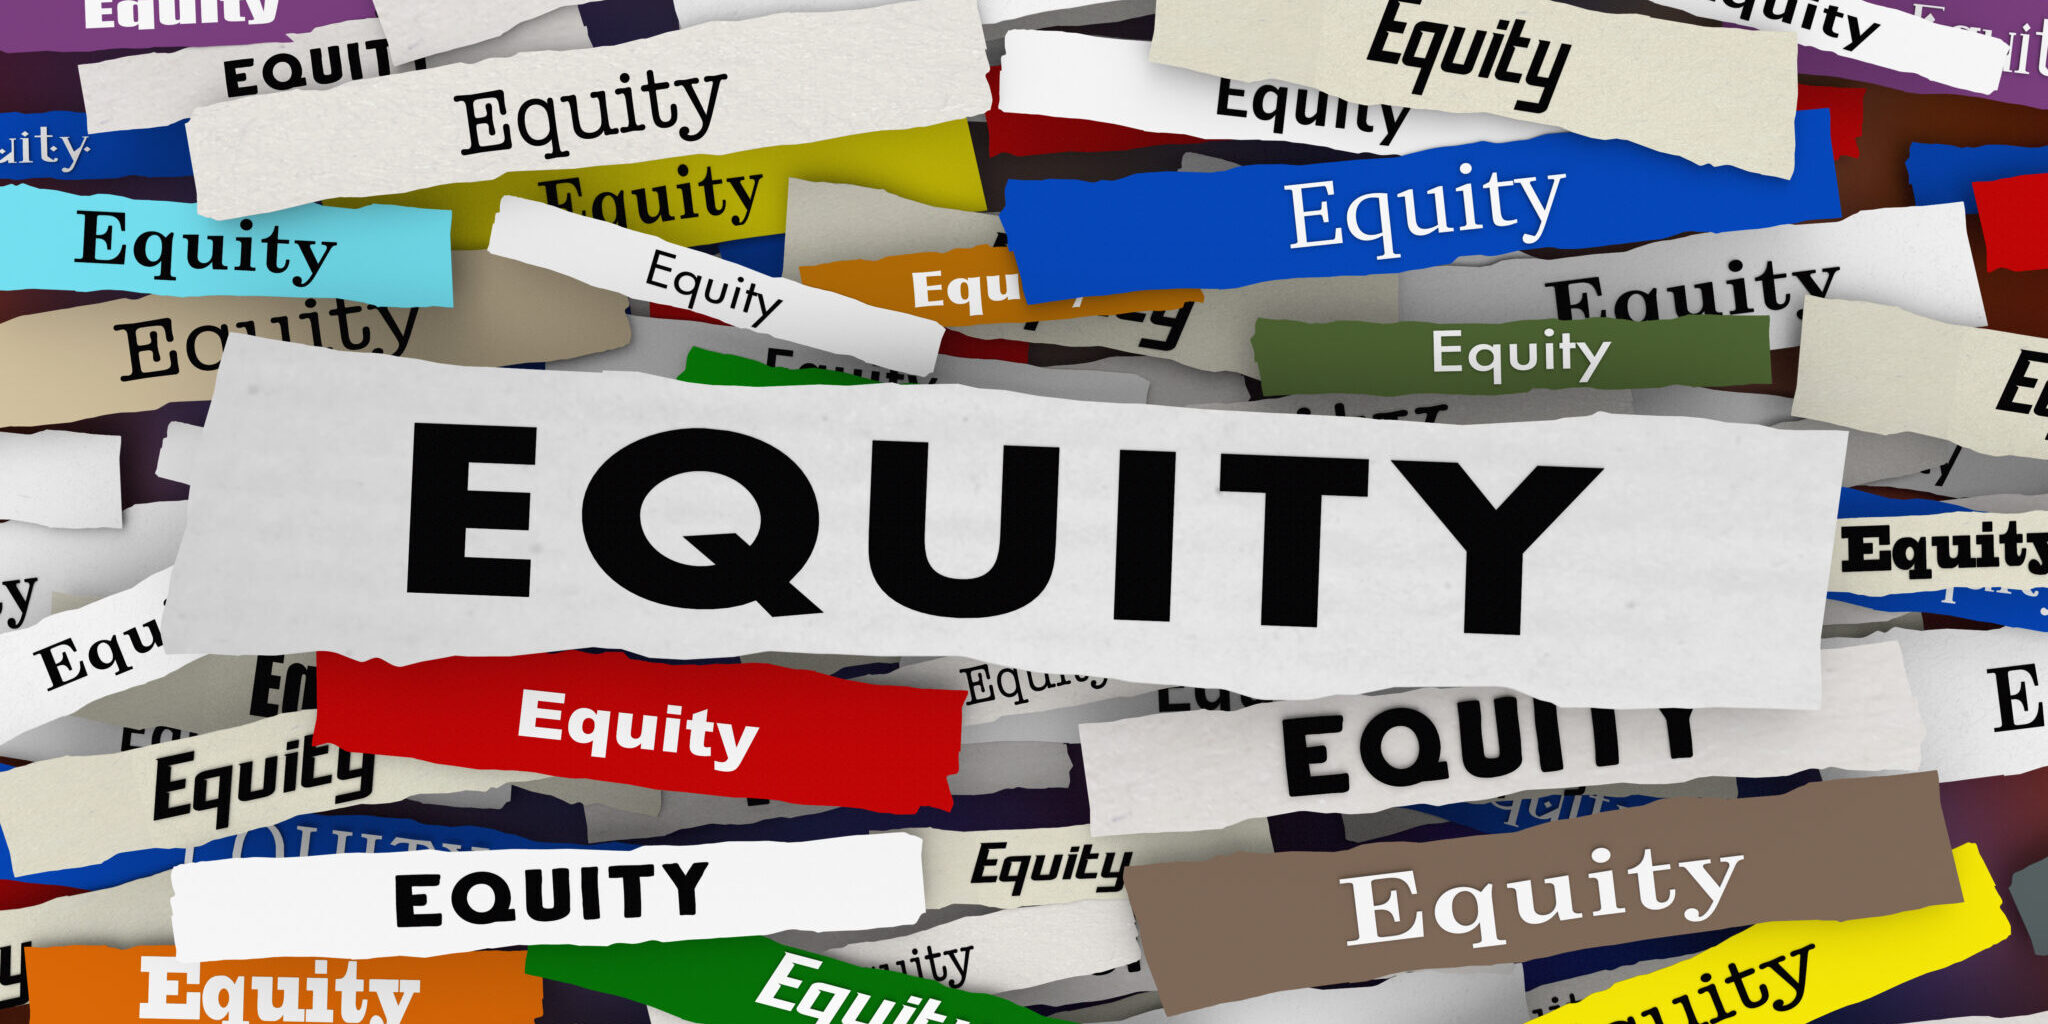 Collage of the word "Equity" in different sizes, colors and text.